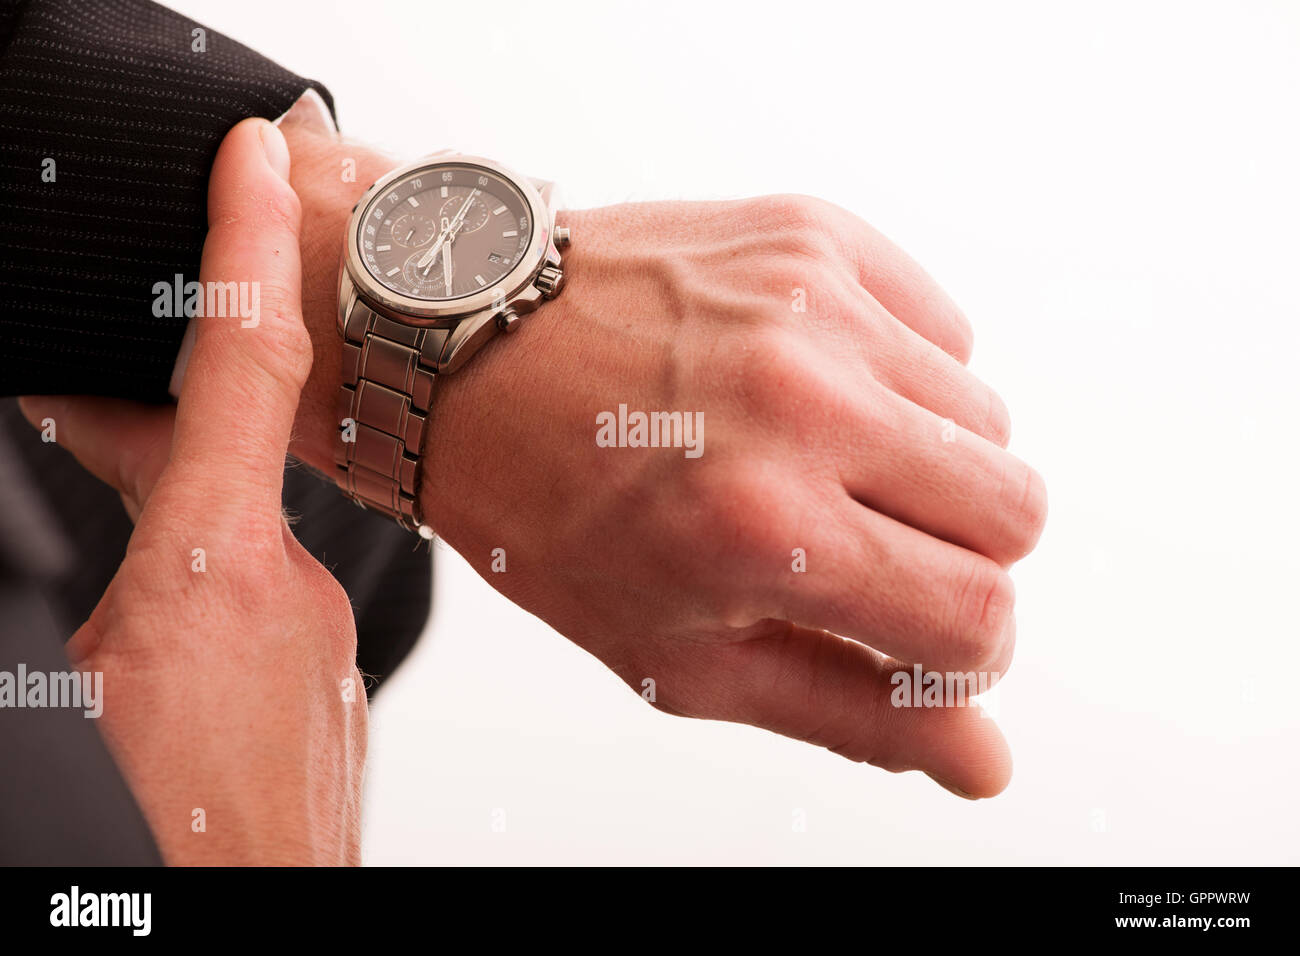 Successful businessman in formal suit checking time on wrist watch isolated over white. Stock Photo